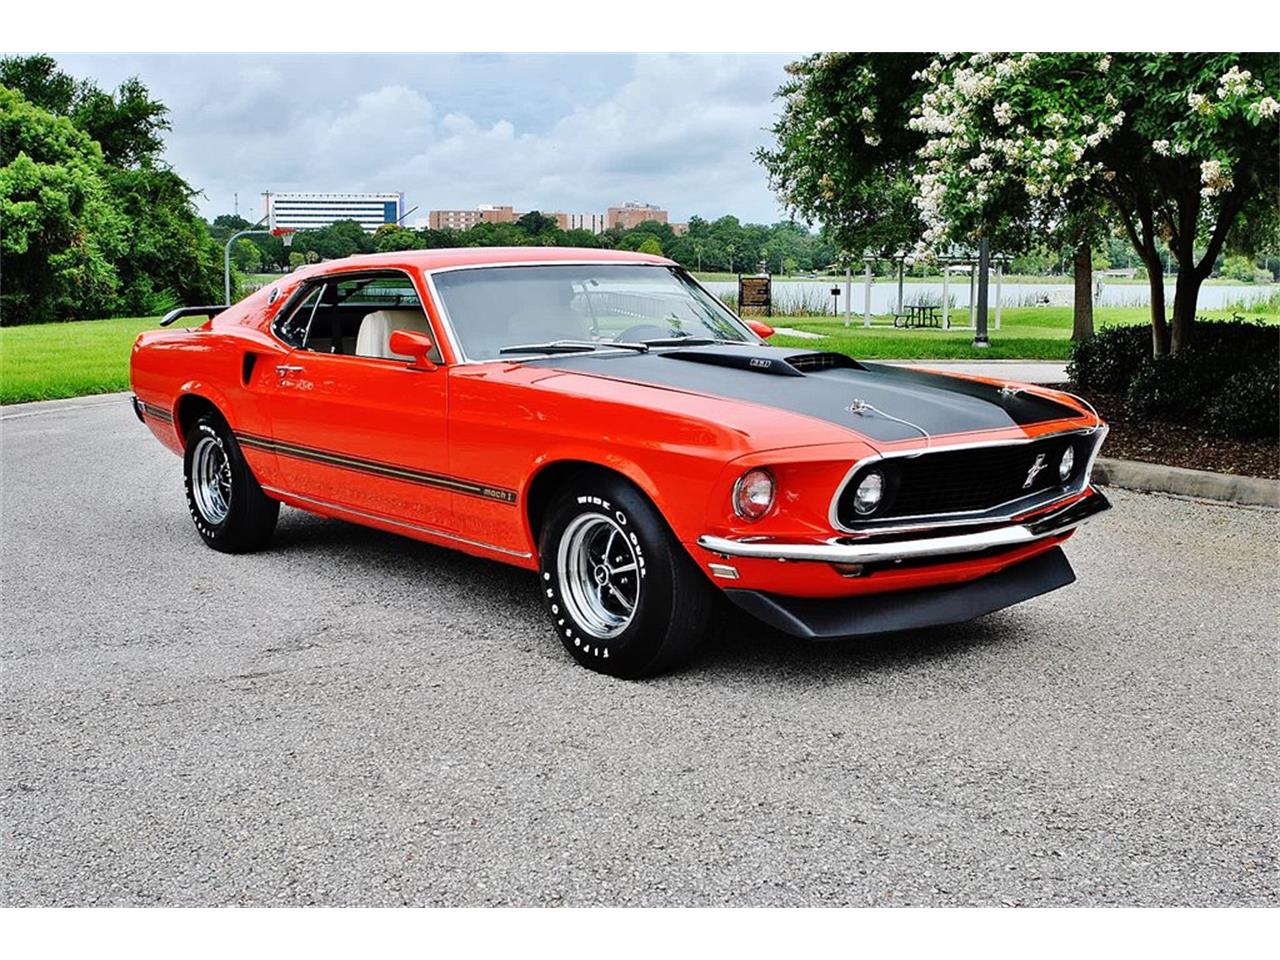 1969 Ford Mustang Mach 1 for Sale | ClassicCars.com | CC-1053819